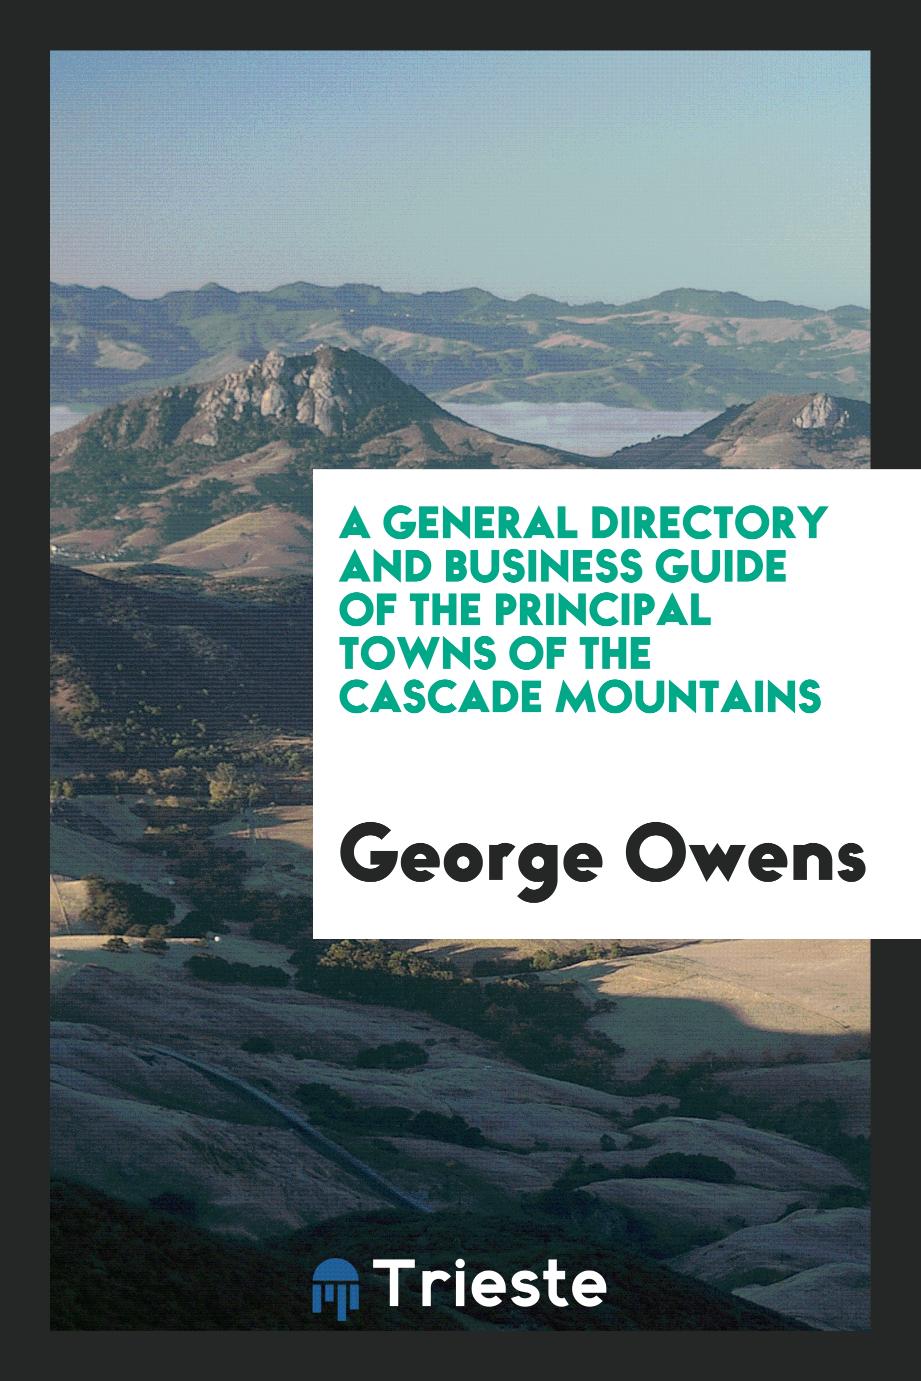 A general directory and business guide of the principal towns of the Cascade Mountains